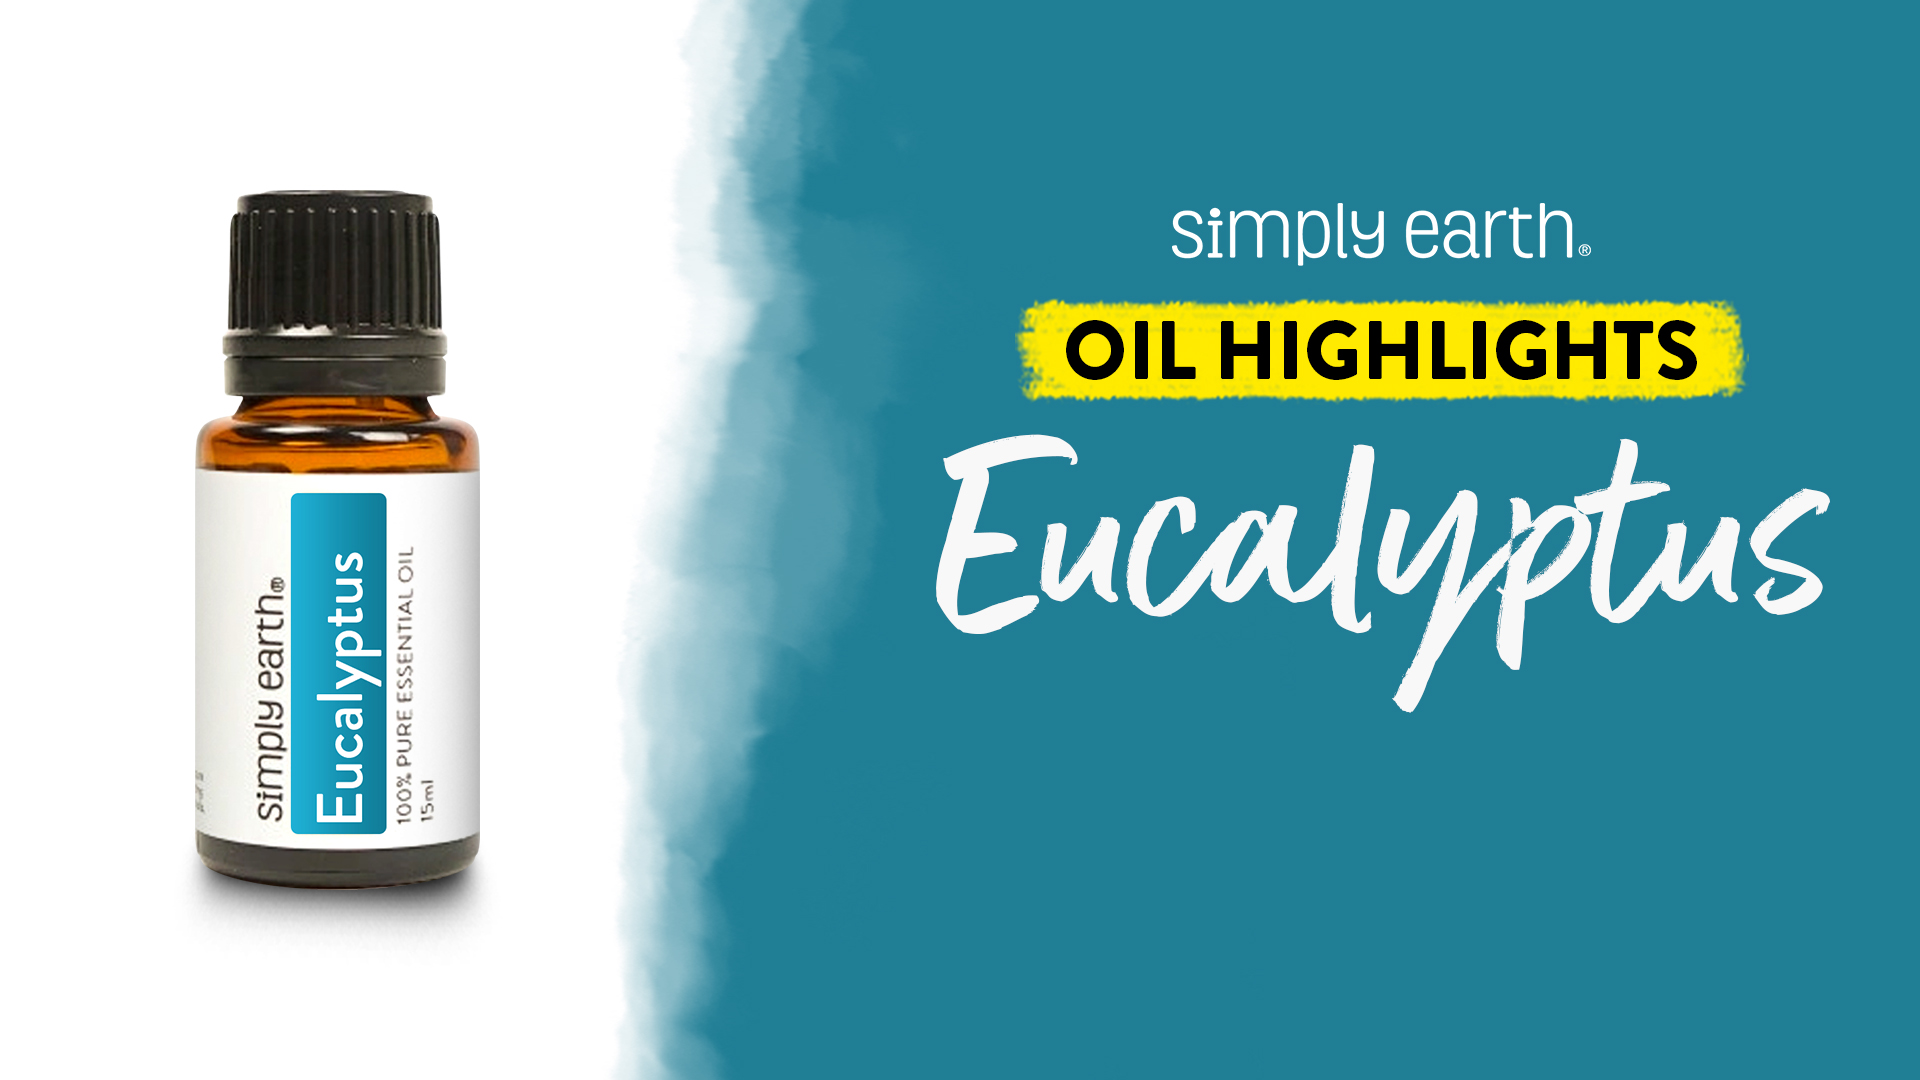 What's The Best Eucalyptus Oil Recommended By An Expert - Glory Cycles